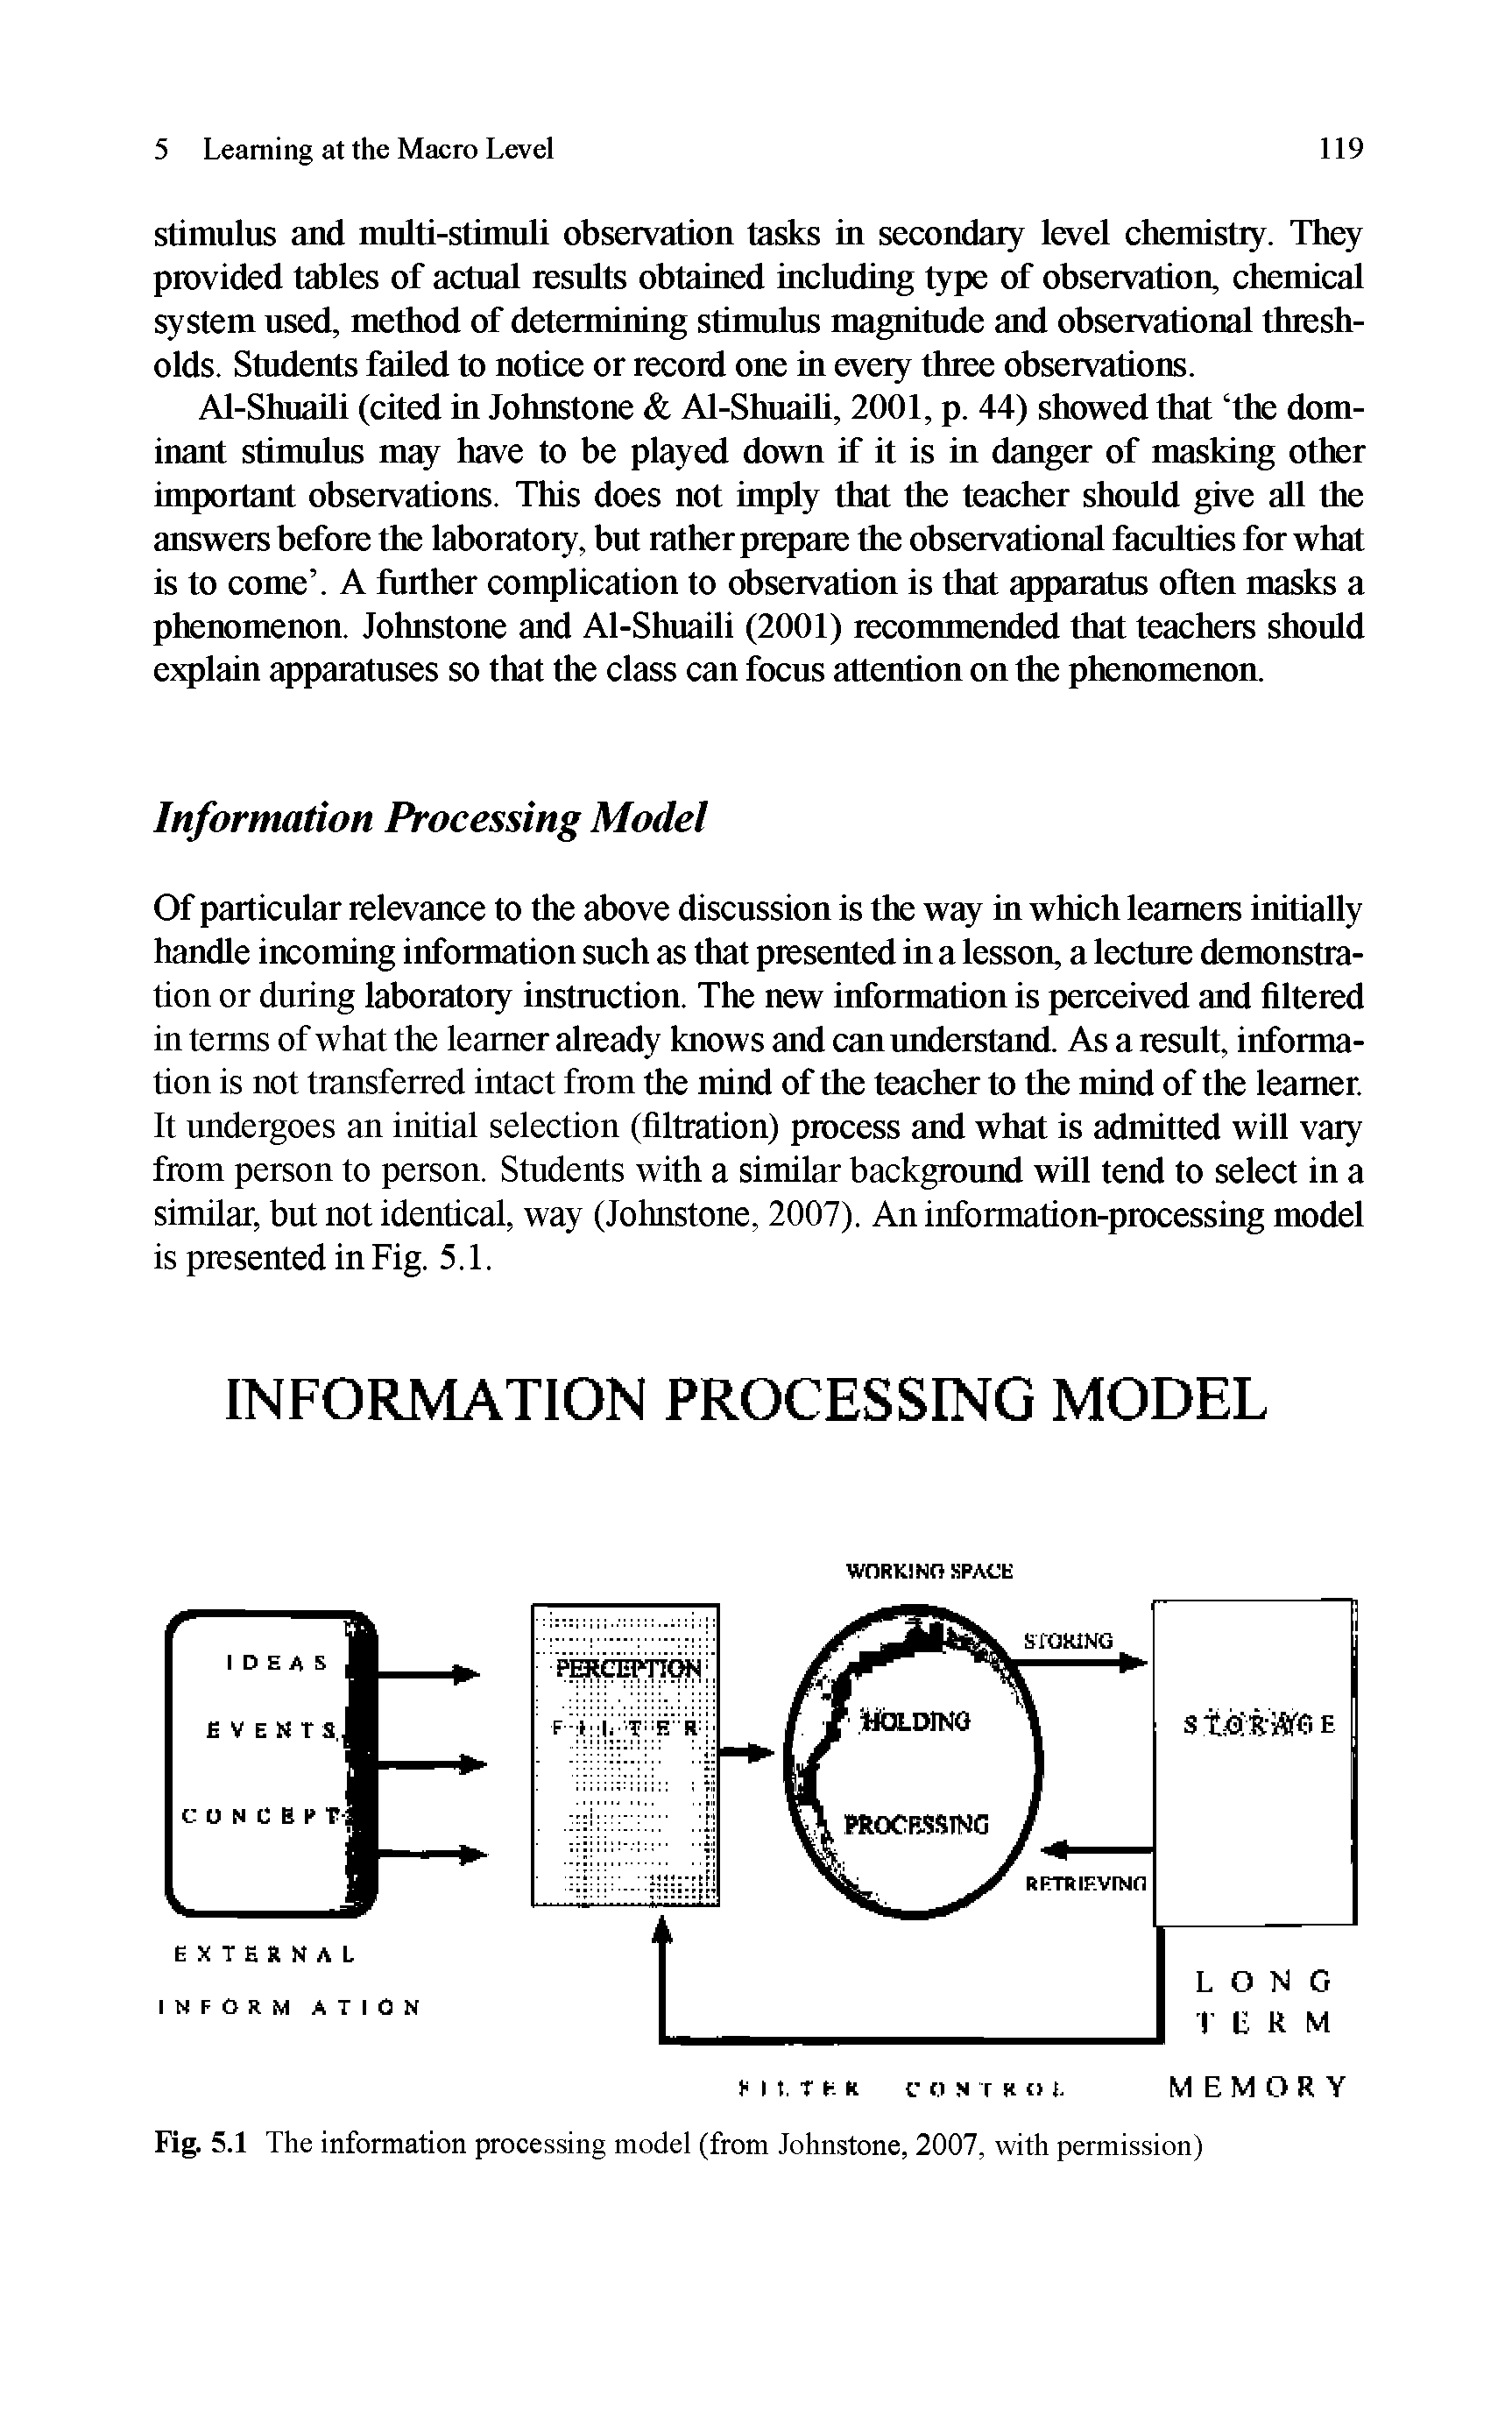 Fig. 5.1 The information processing model (from Johnstone, 2007, with permission)...